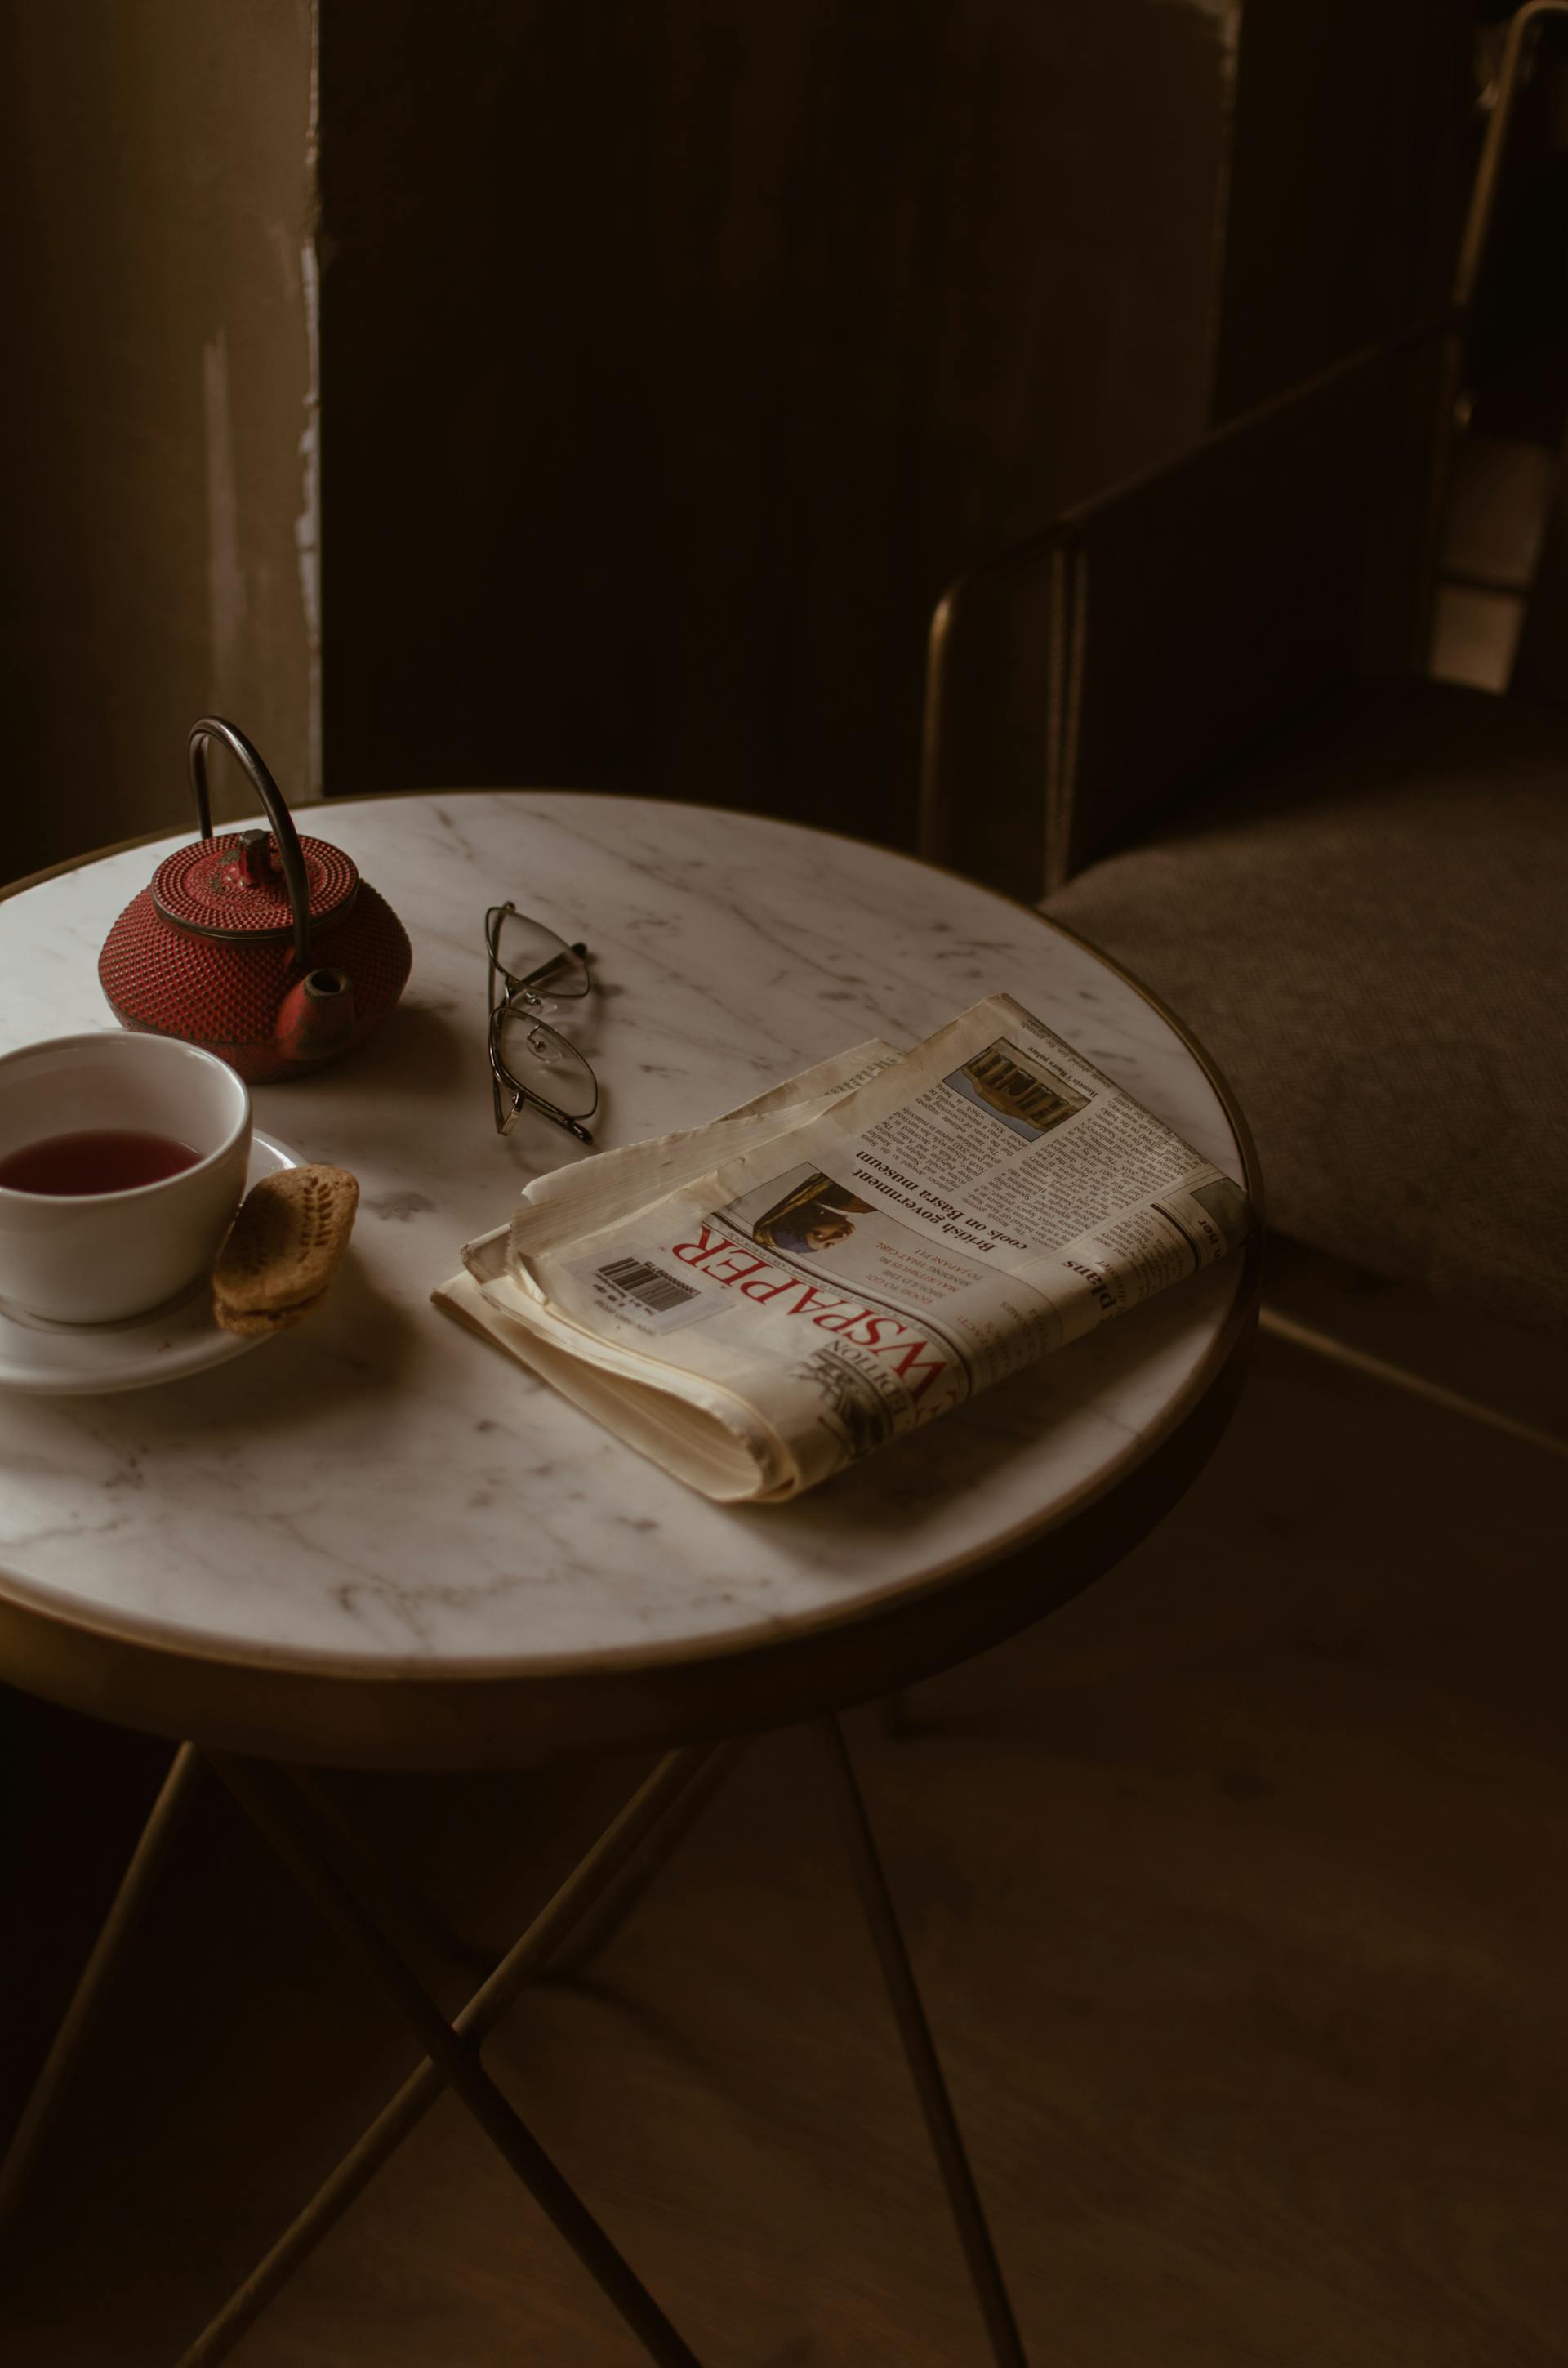 A folded newspaper lying on a table | Source: Pexels